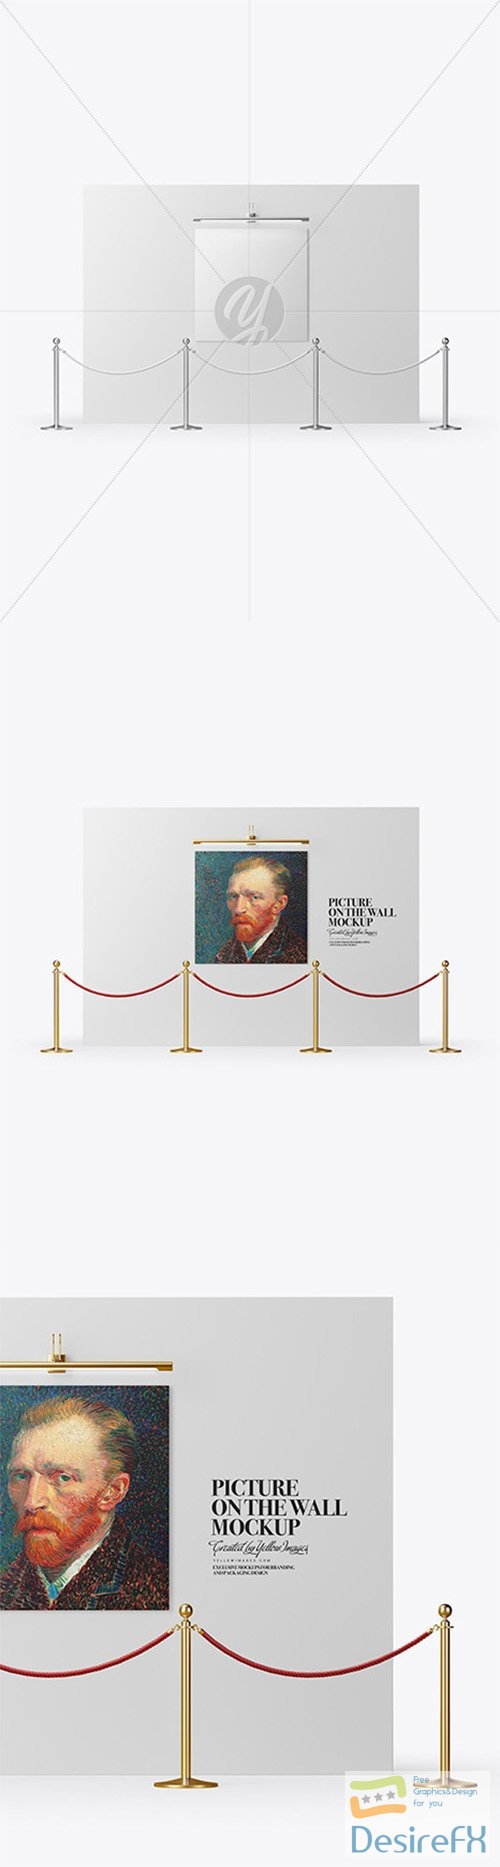 Canvas Picture on the Wall Mockup 82035 TIF